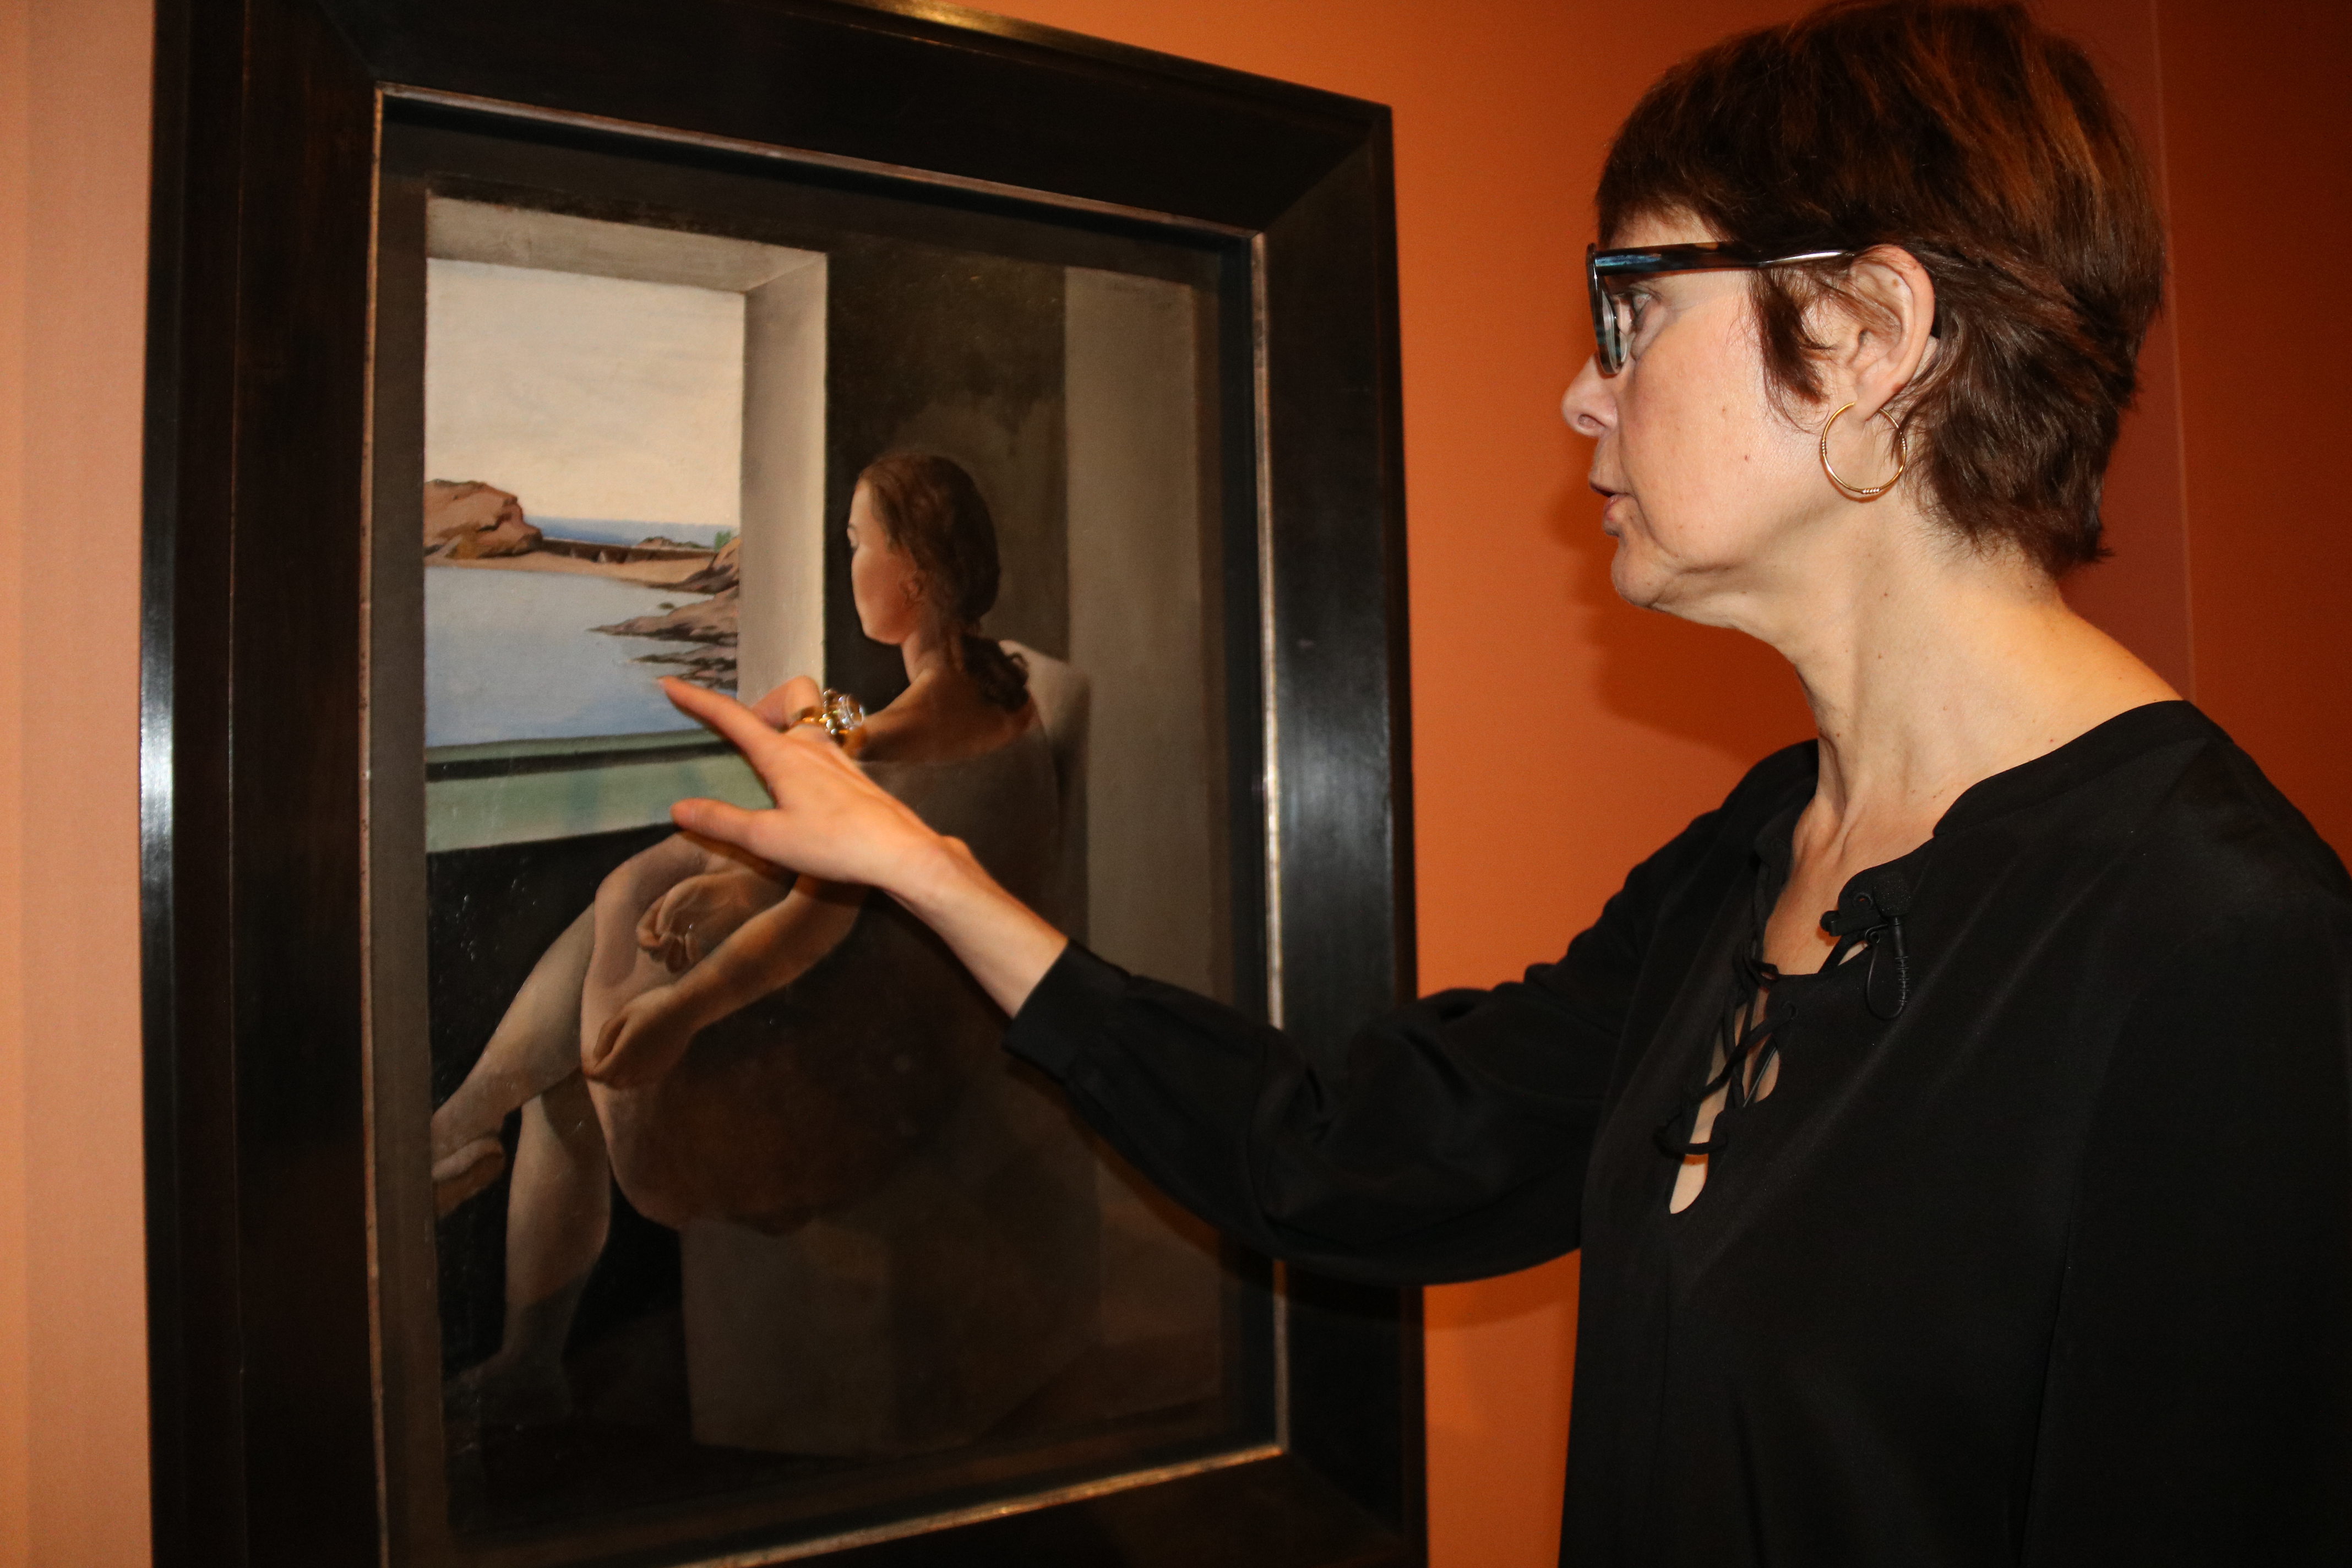 The director of Dalí Museums, Montse Aguer before the portrait 'Figure in profile' (by ACN)